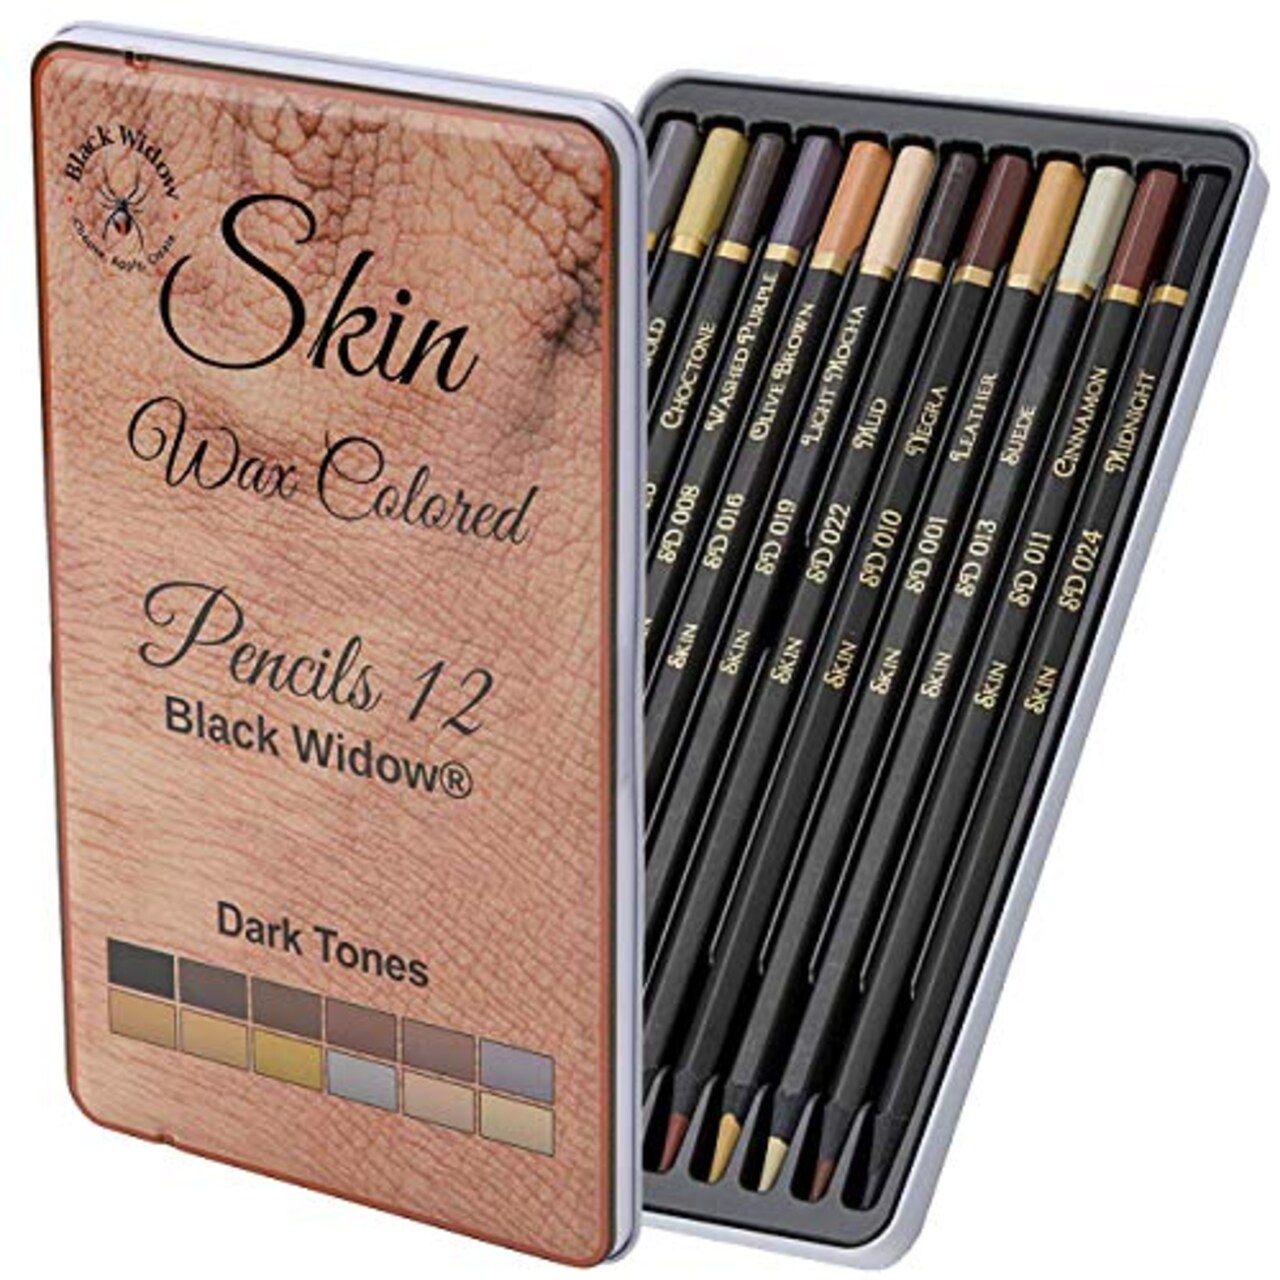 Black Widow Skin Tone Colored Pencils for Adult Coloring - 12